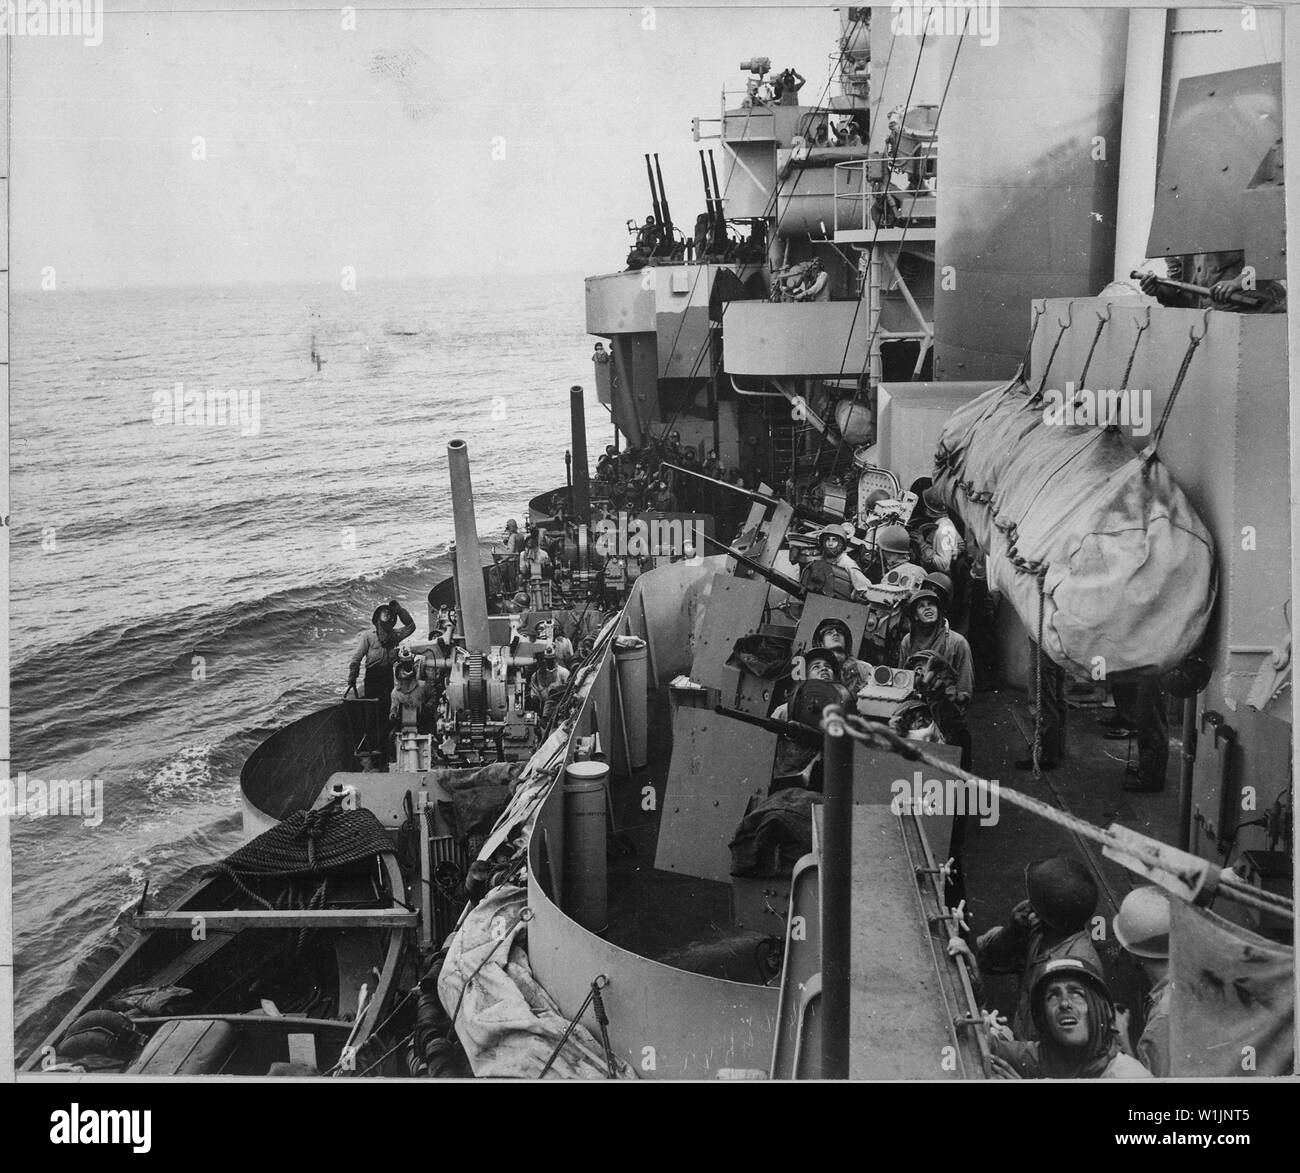 The gun crews of a Navy cruiser covering American landing on the island of Mindoro, December 15, 1944, scan the skies in an effort to identify a plane overhead. Two 5 inch (127mm) guns are ready while inboard 20mm anti-aircraft crews are ready to act.; General notes:  The cruiser is USS Phoenix (CL-46), identifiable by her unique sprayed camouflage Measure 32 Design 5d. Stock Photo